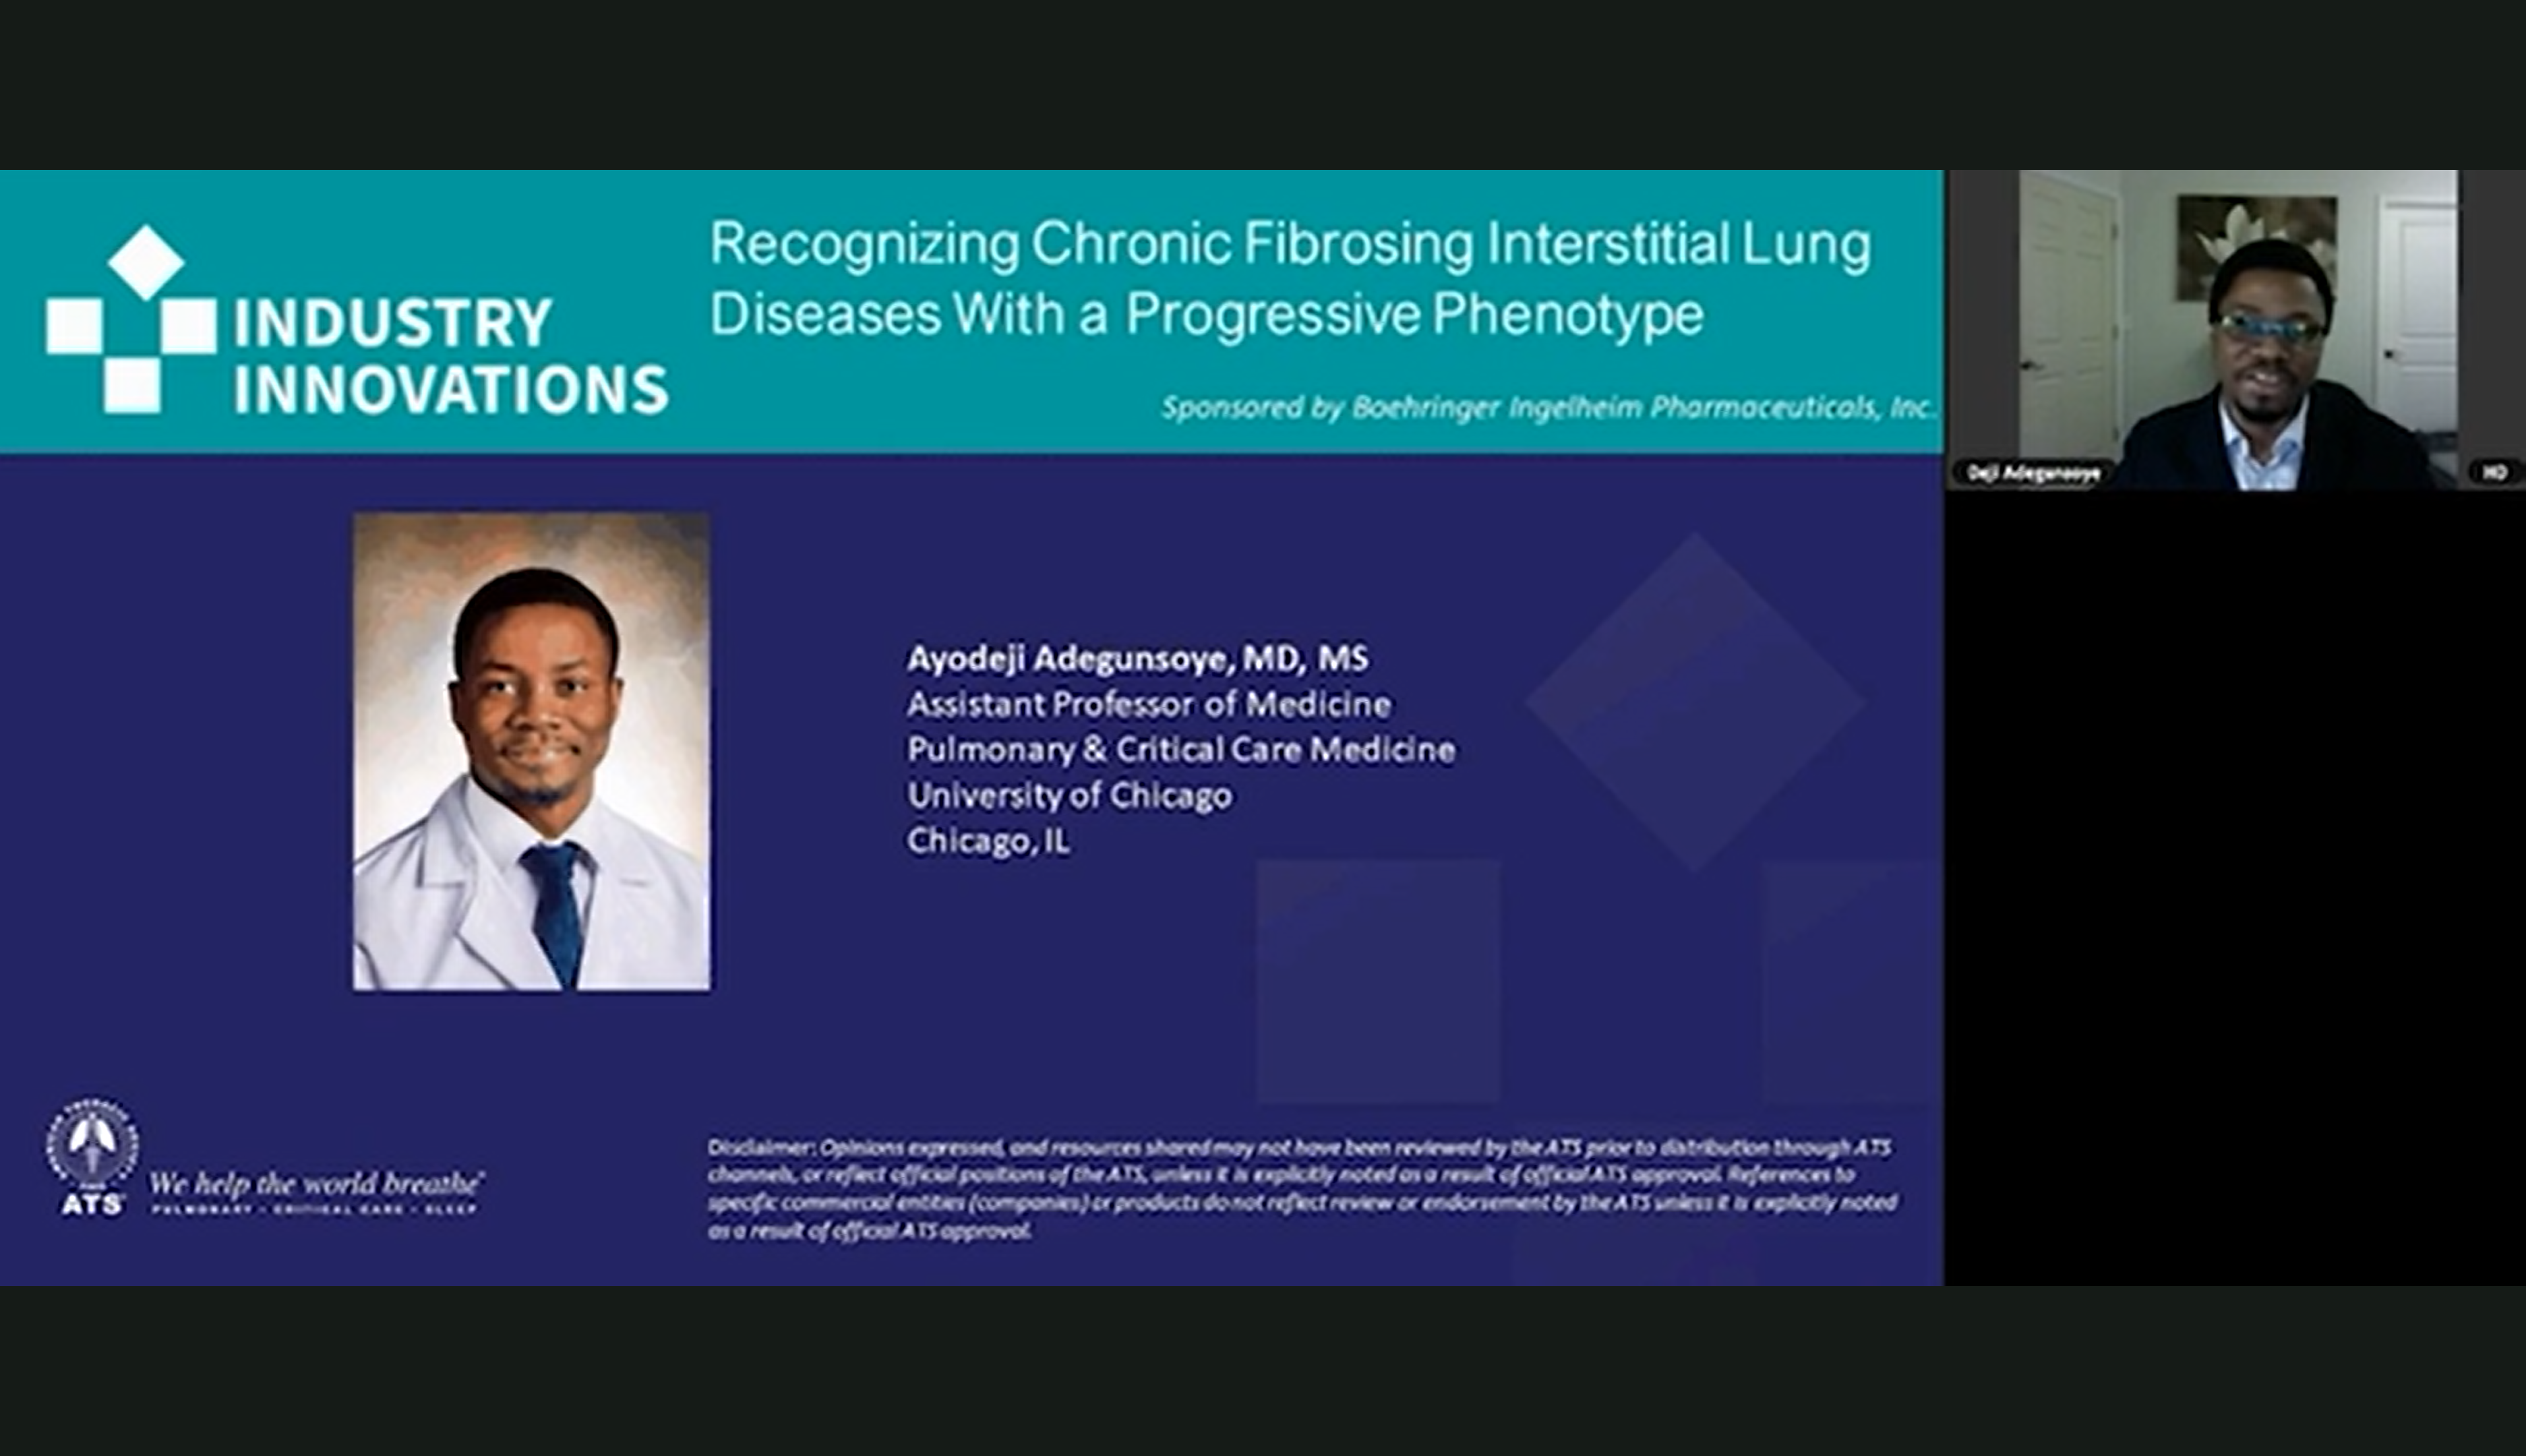 Recognizing Chronic Fibrosing Interstitial Lung Diseases With a Progressive Phenotype